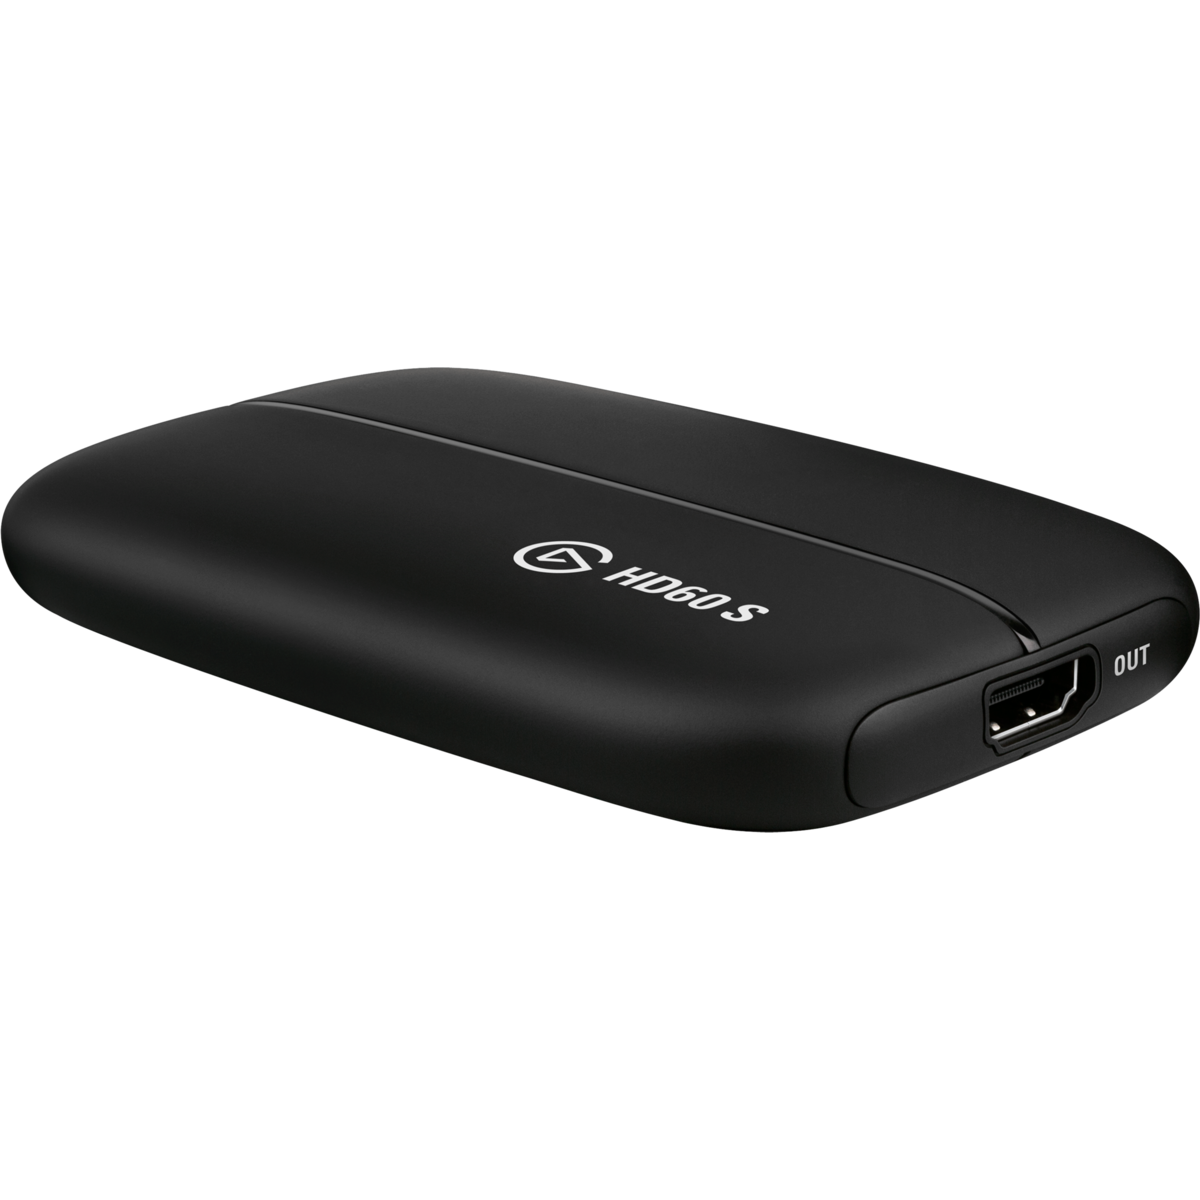 Gallery Game Capture HD60 S Device 01